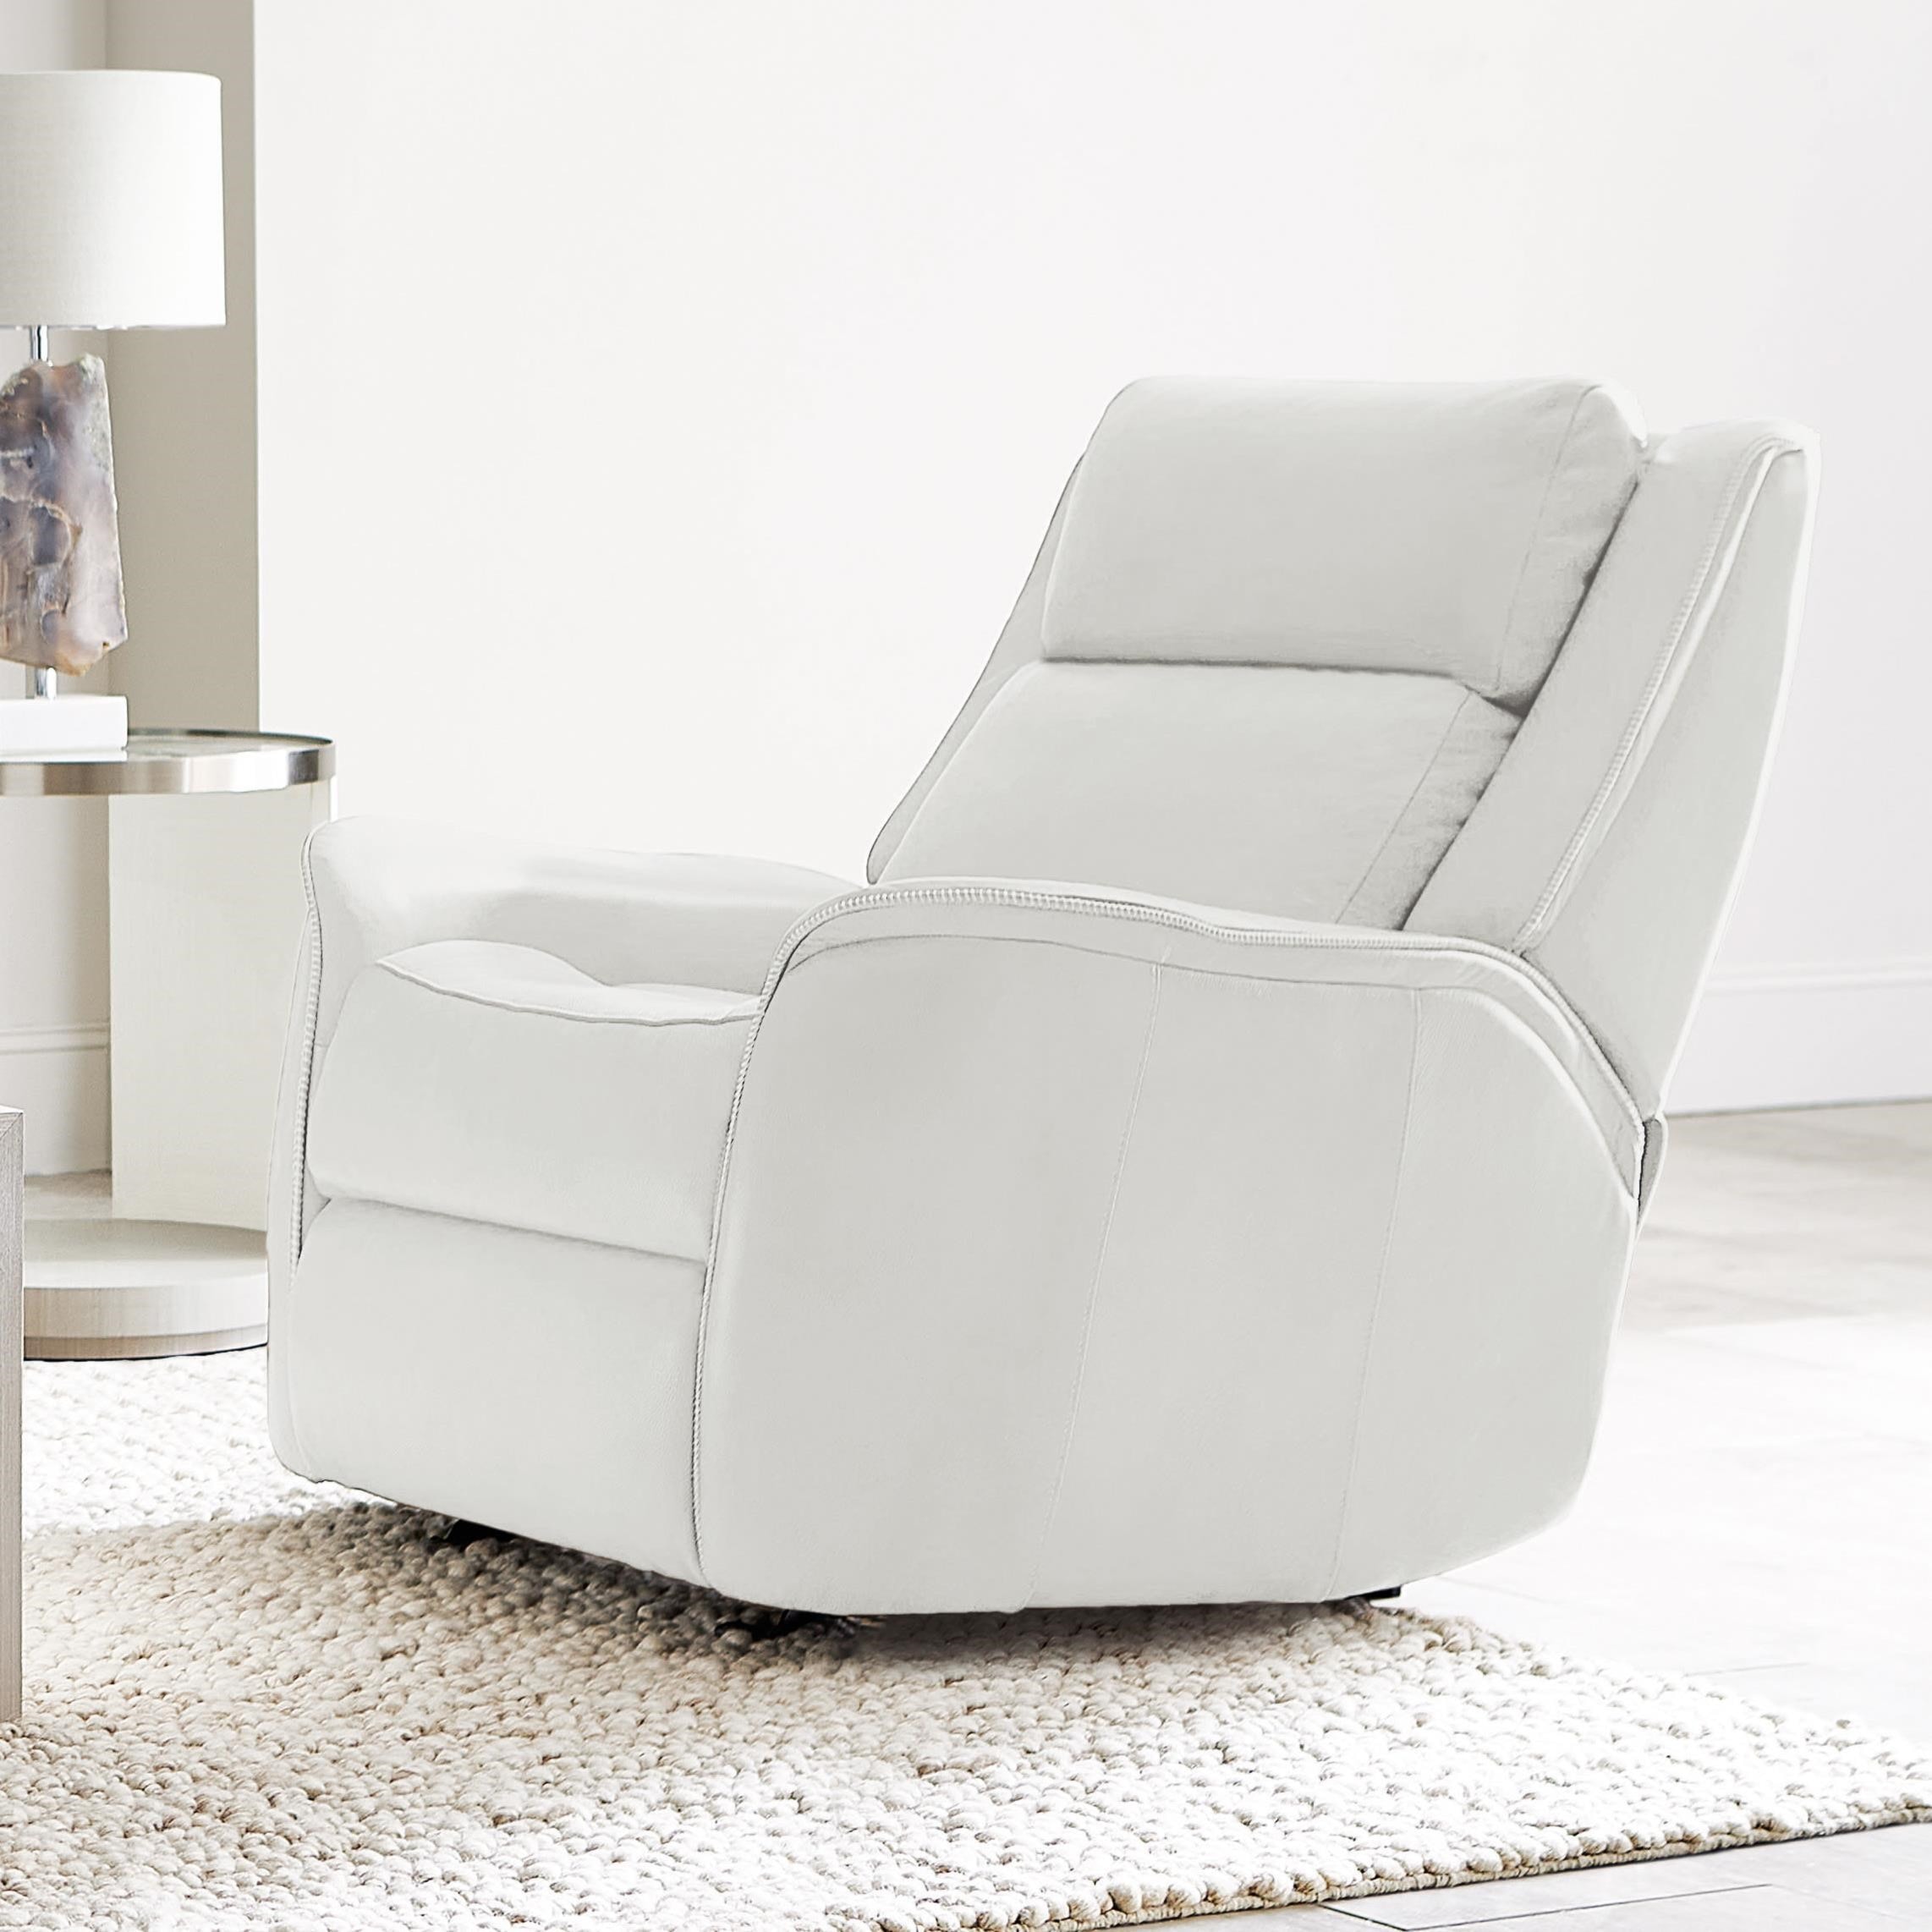 Wrigley Collection by Bernhardt, White Recliner